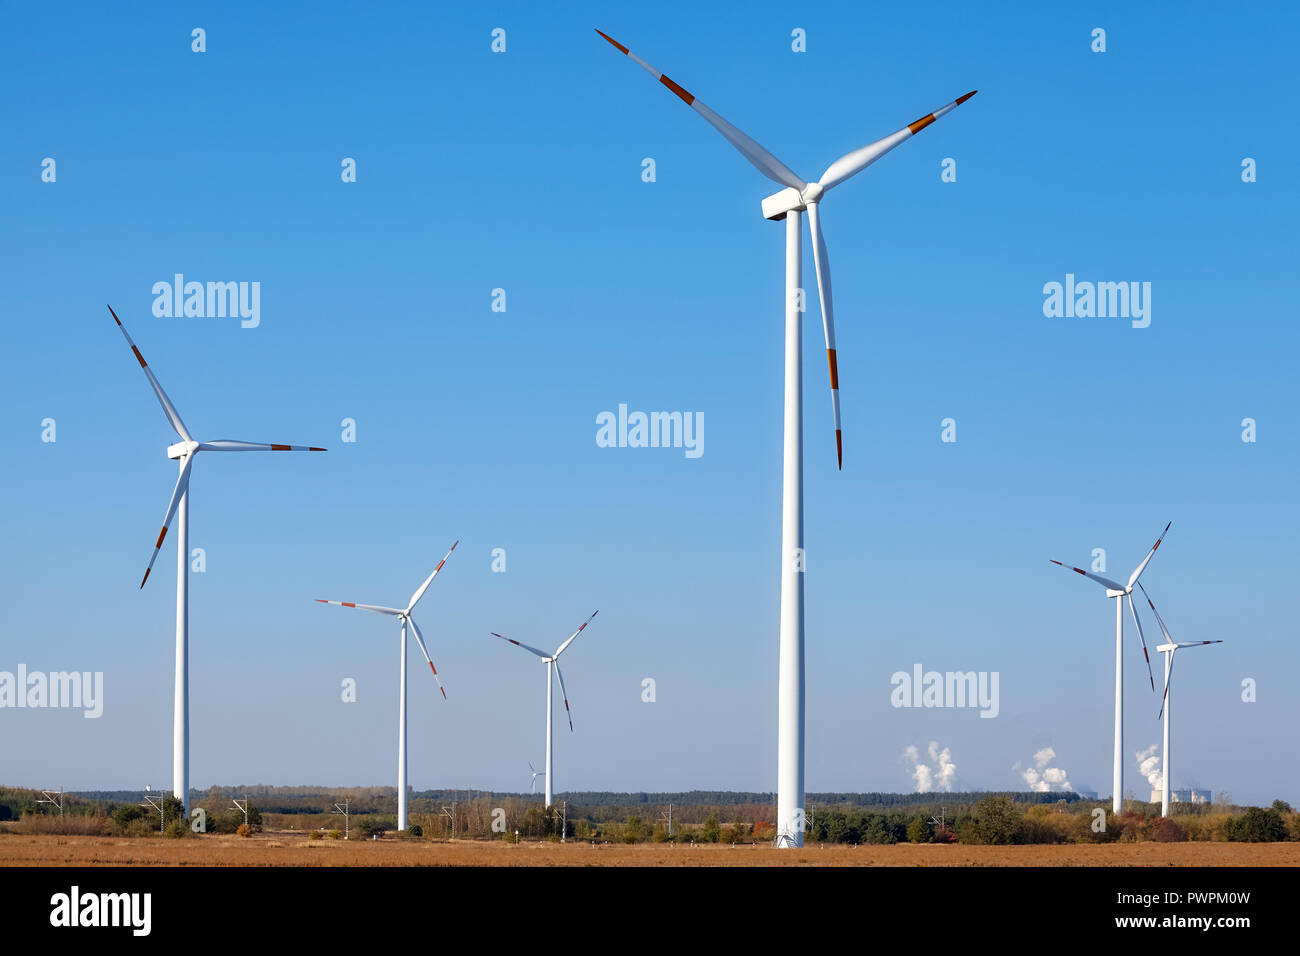 Windmills with smoking chimneys in background. Stock Photo